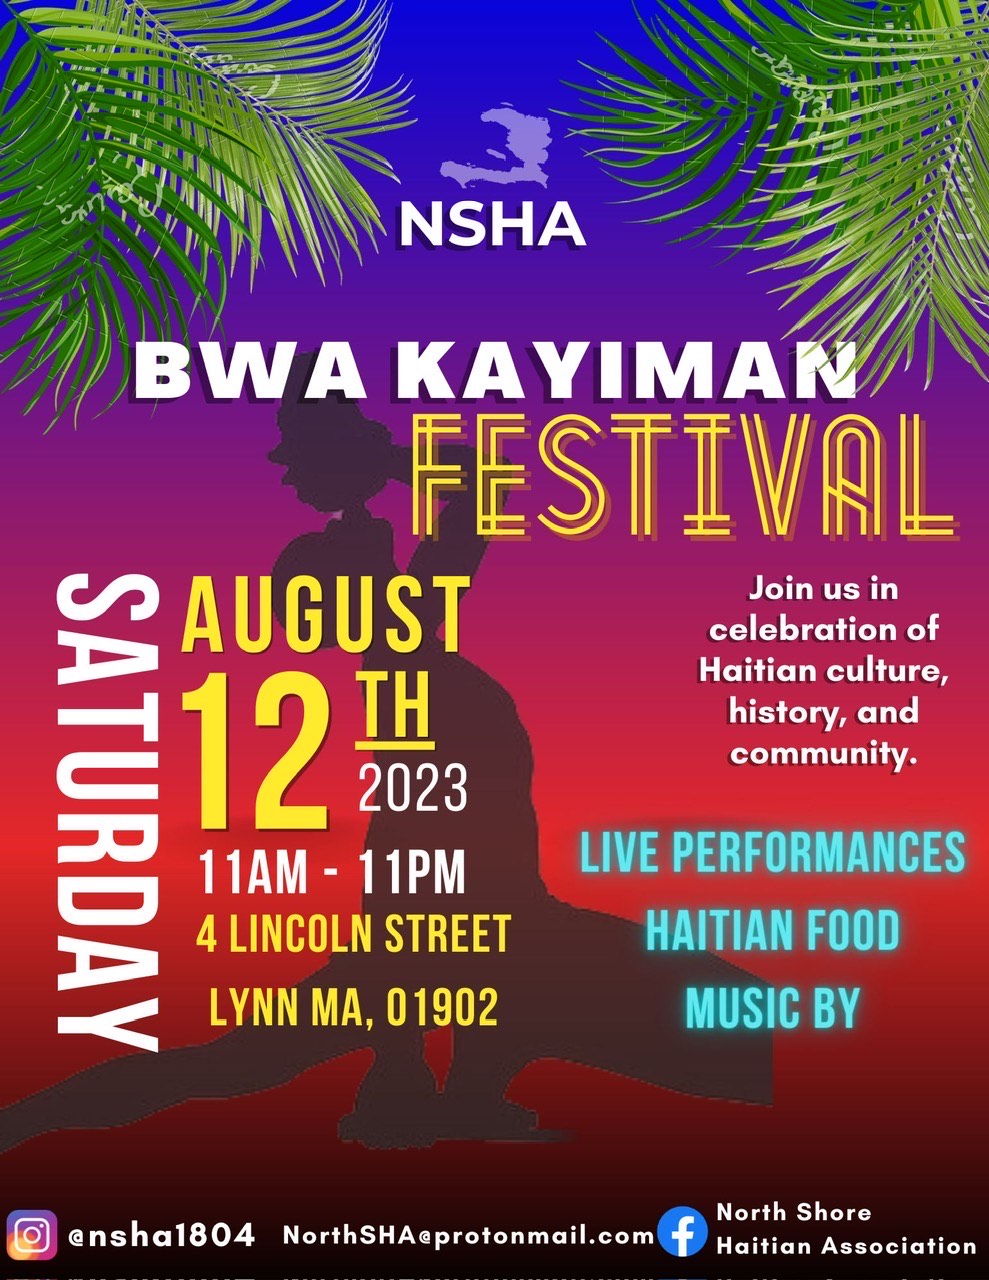 the flyer for the nswa kayyman festival.